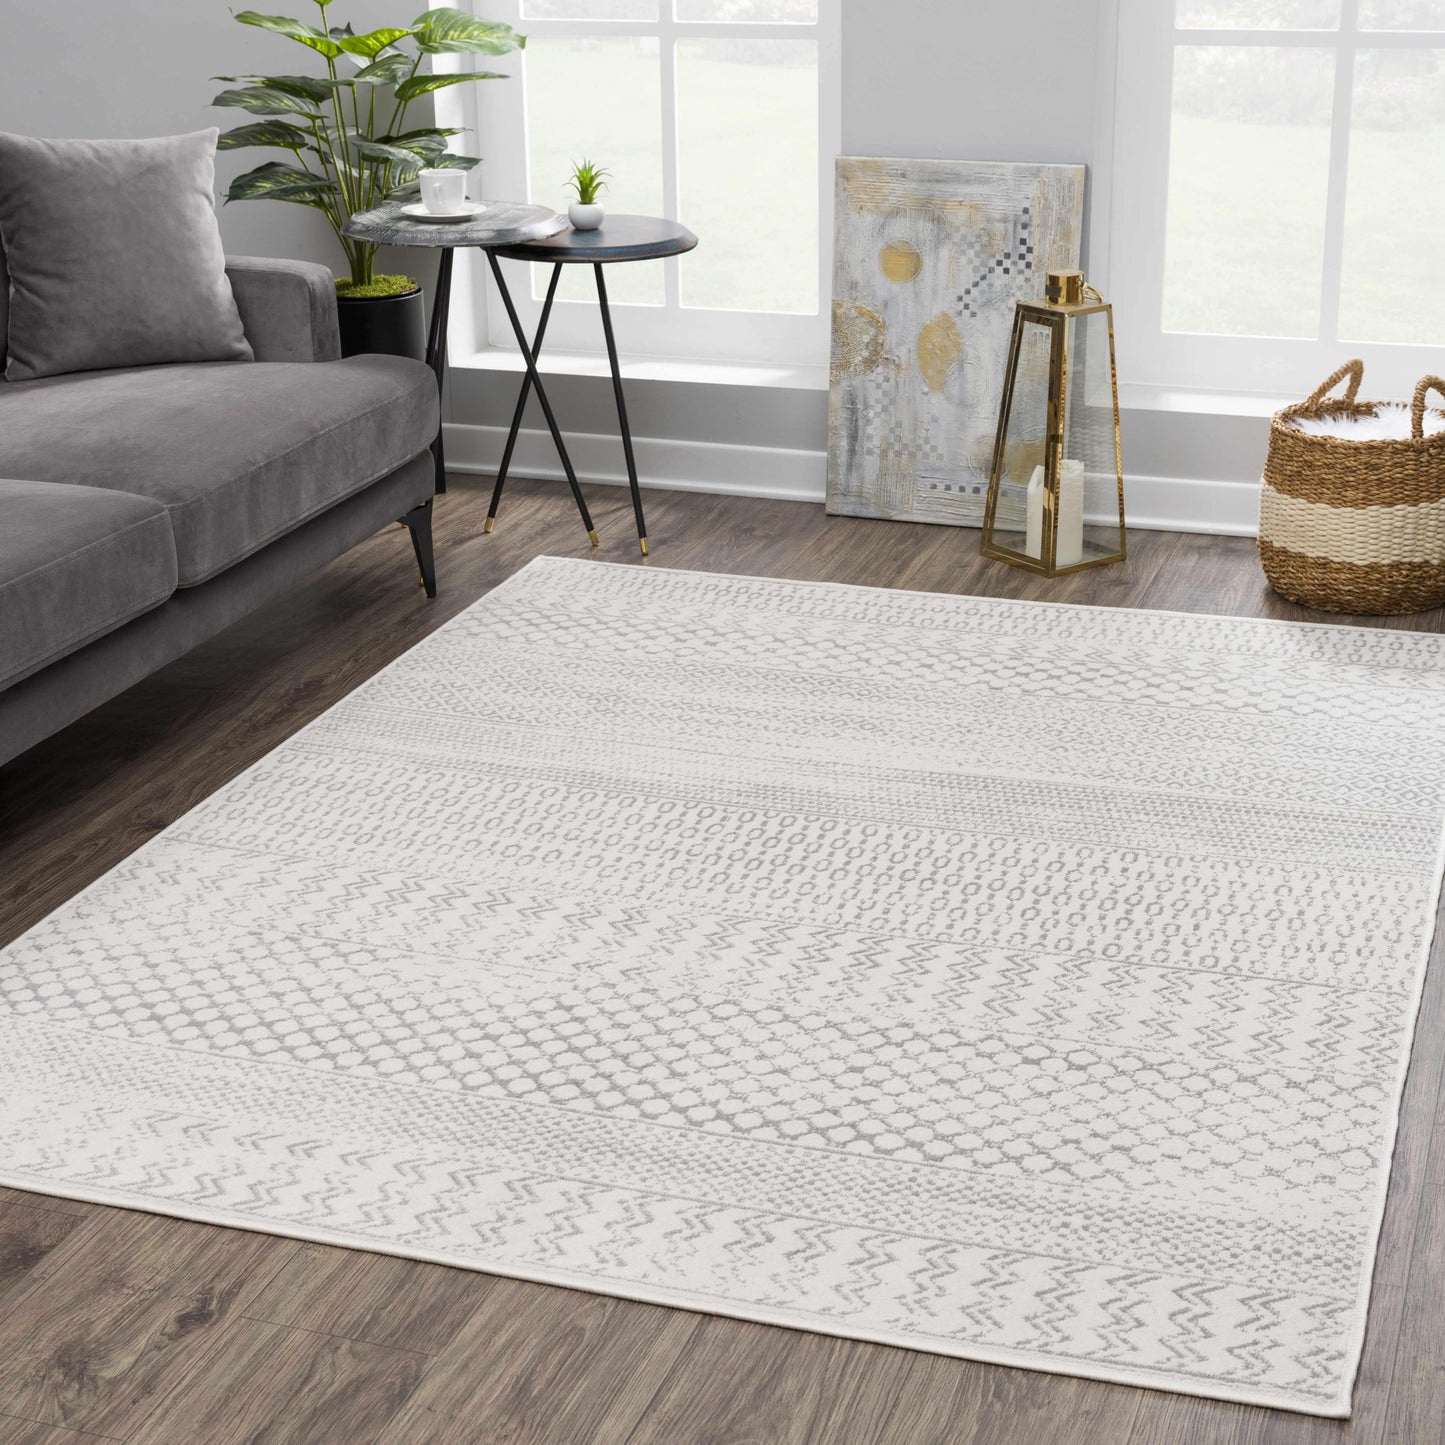 Boutique Rugs Rugs Tigri Aztec Ivory & Gray 2318 Area Rug